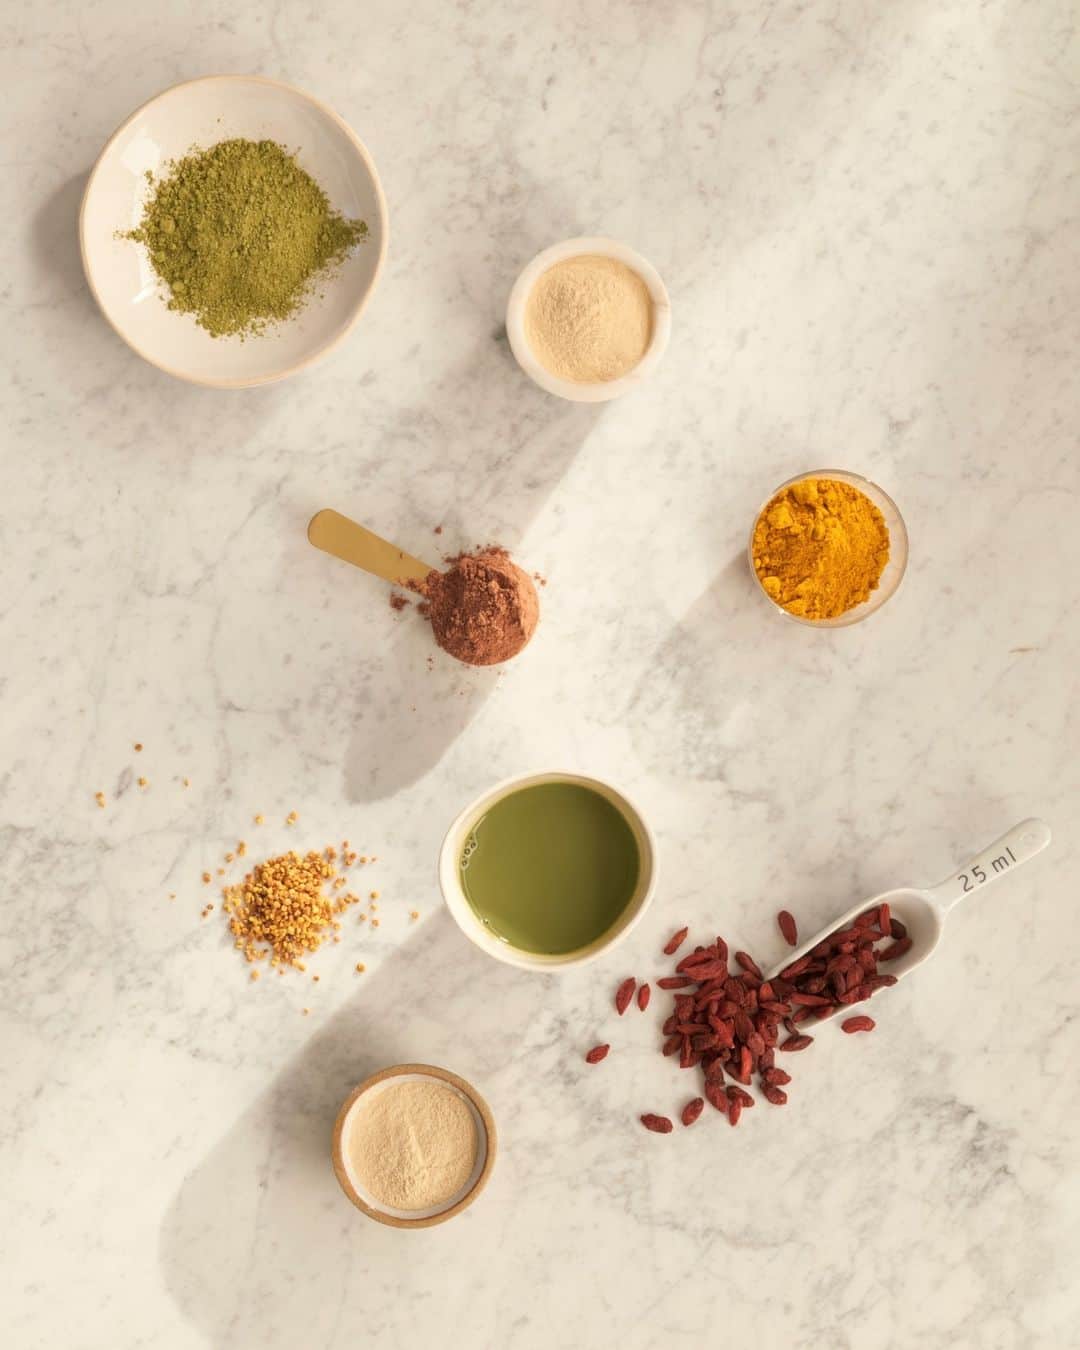 Neal's Yard Remediesのインスタグラム：「Kick-start your weekend with our selection of adaptogens, perfect for adding to your morning smoothie or porridge. 🌿⁠ ⁠ From powders to berries, supplementing your diet with nature’s goodness is a great way to help support your inner wellbeing. ⁠ ⁠ Are you a matcha lover or a baobab enthusiast? What's your go-to adaptogen and how do you implement it in your diet? Comment below... 🙏」